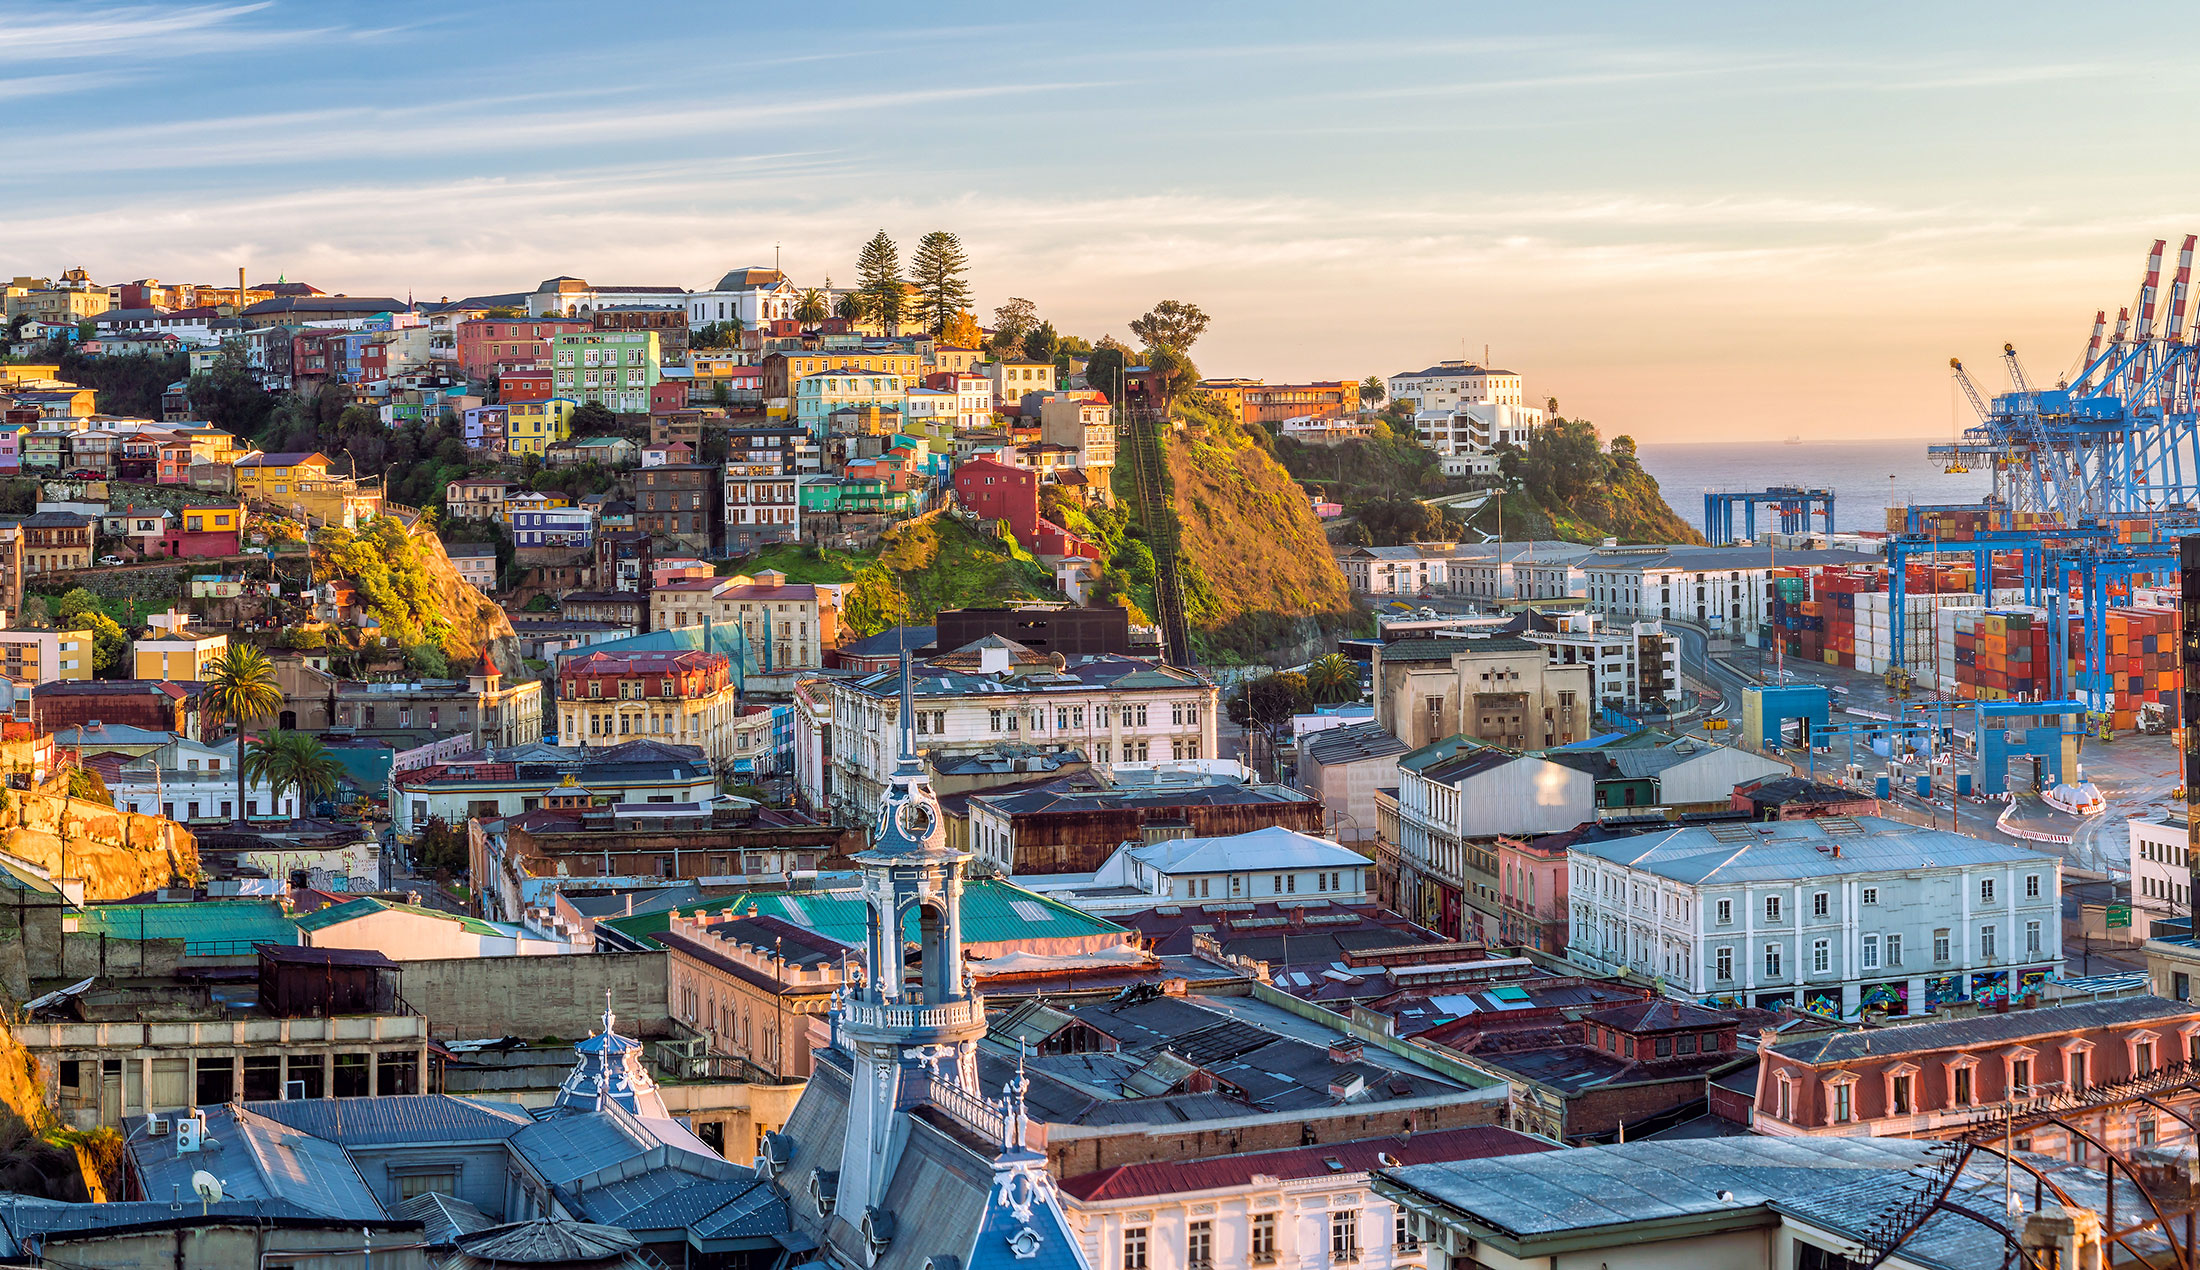 Colourful buildings of Valparaiso, Chile